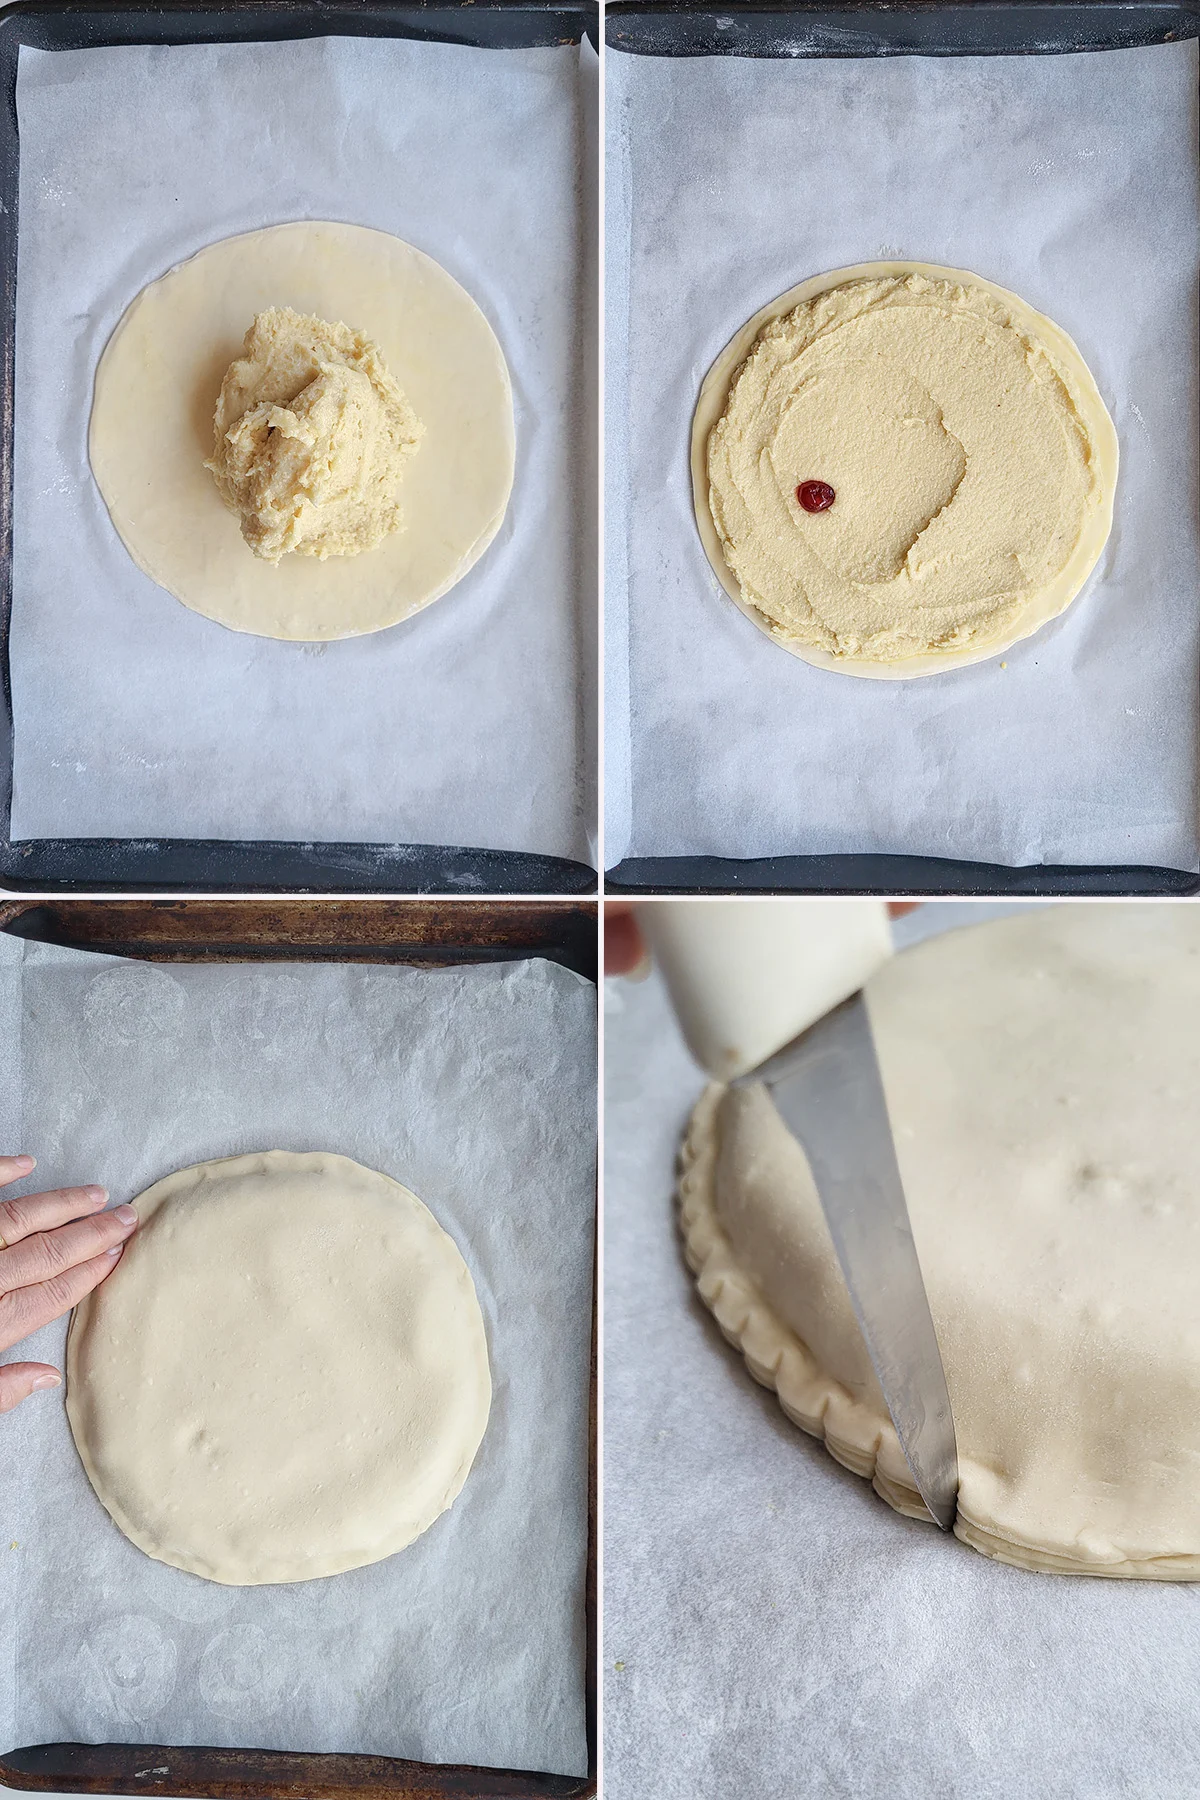 a round of dough covered with almond batter and a cherry. Pressing edges of galette.